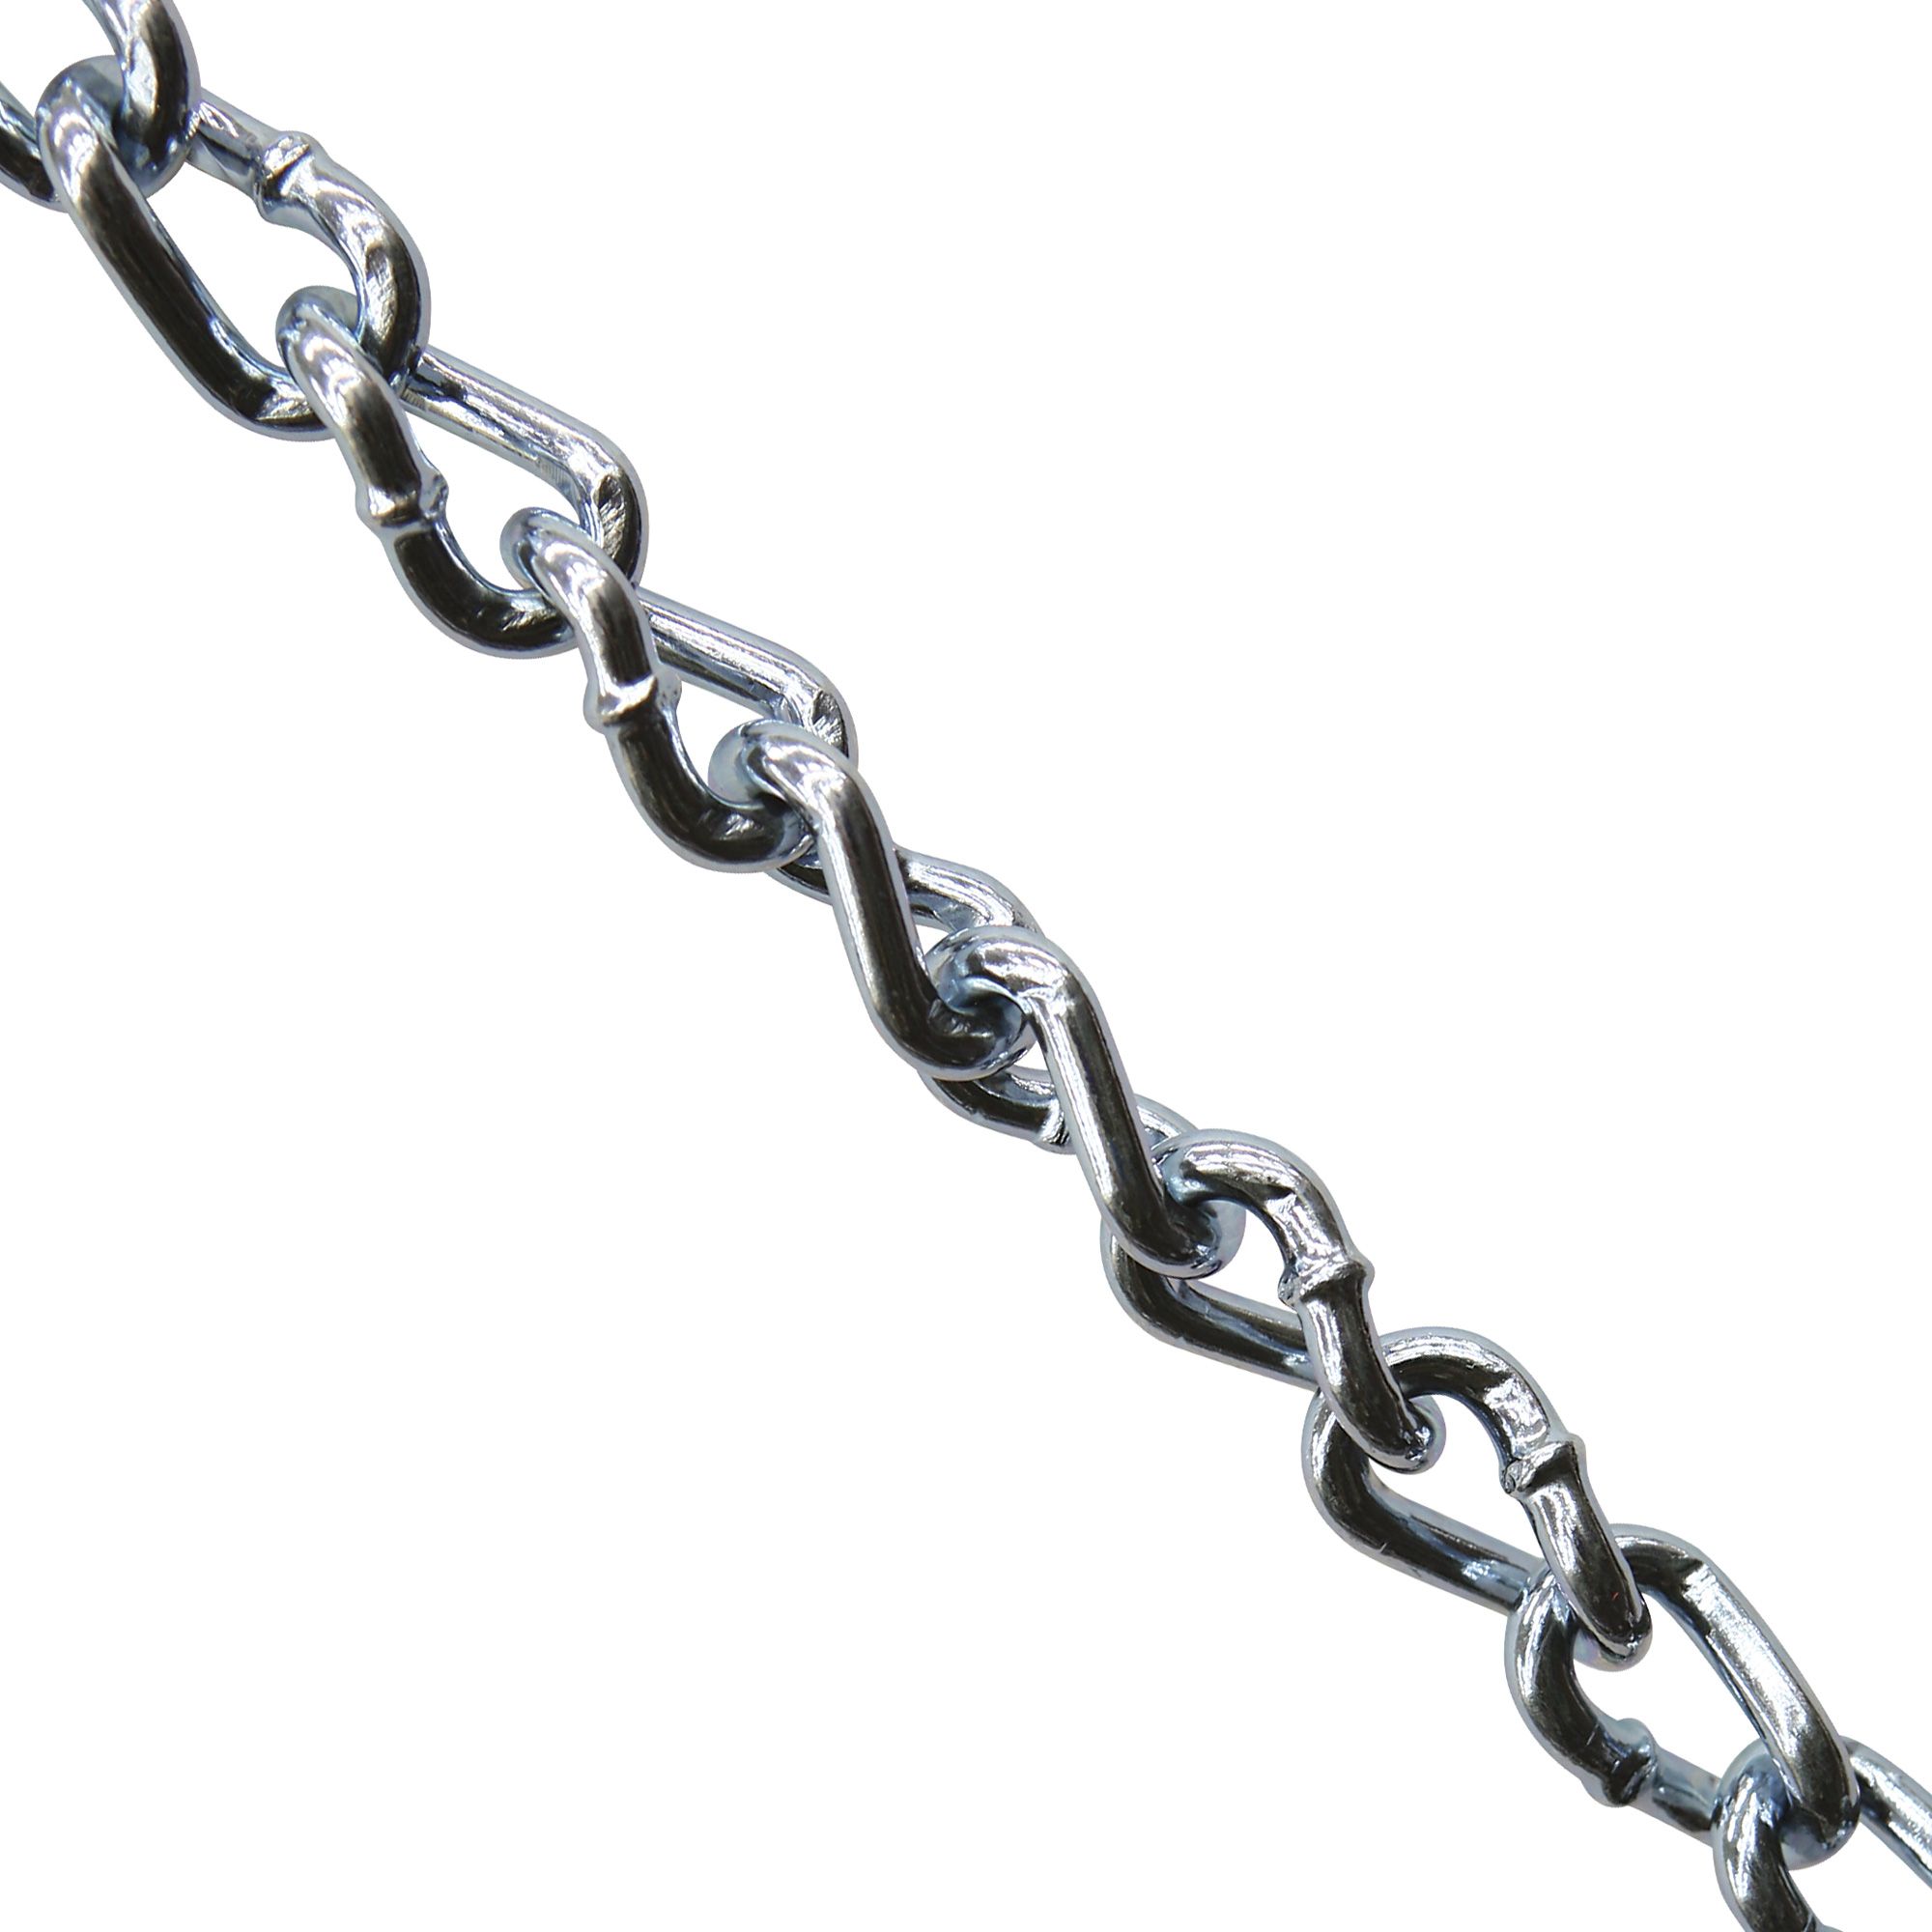 Expo A30001  Nickel Plated Twisted Chain 8 Links 1"x1.0m 